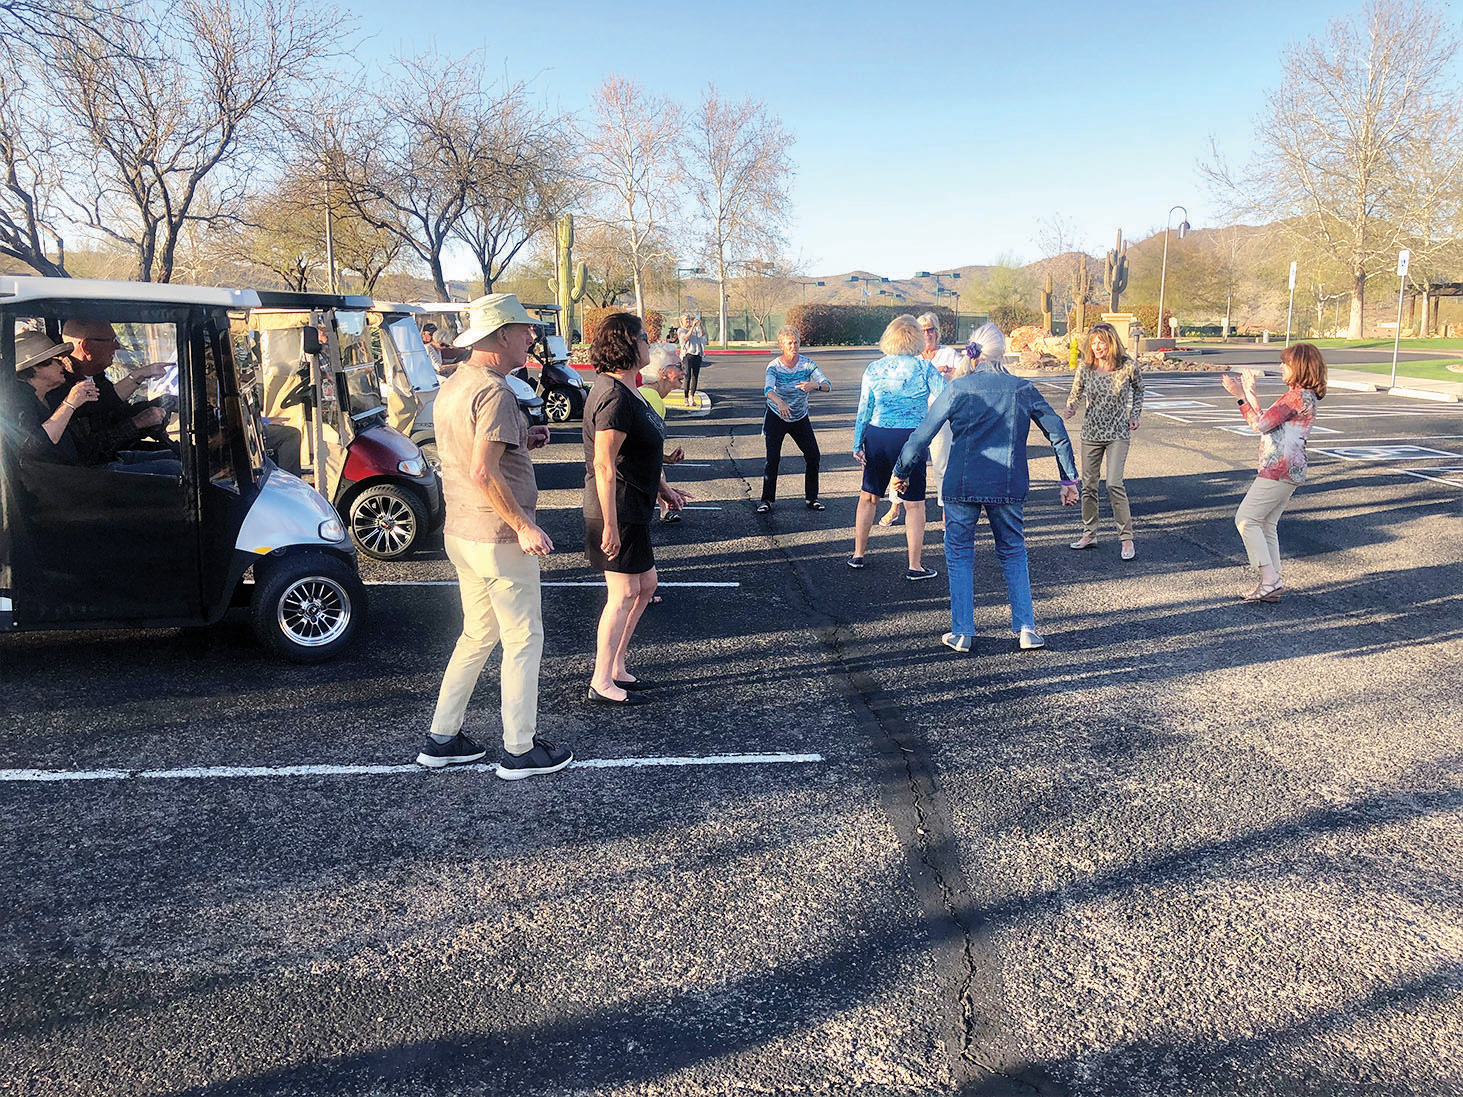 A whole lotta happy going on! The senior movers and shakers continue the lesson to dance like nobody's watching on The Preserve parking lot playground. (Photo by Gary Lange)